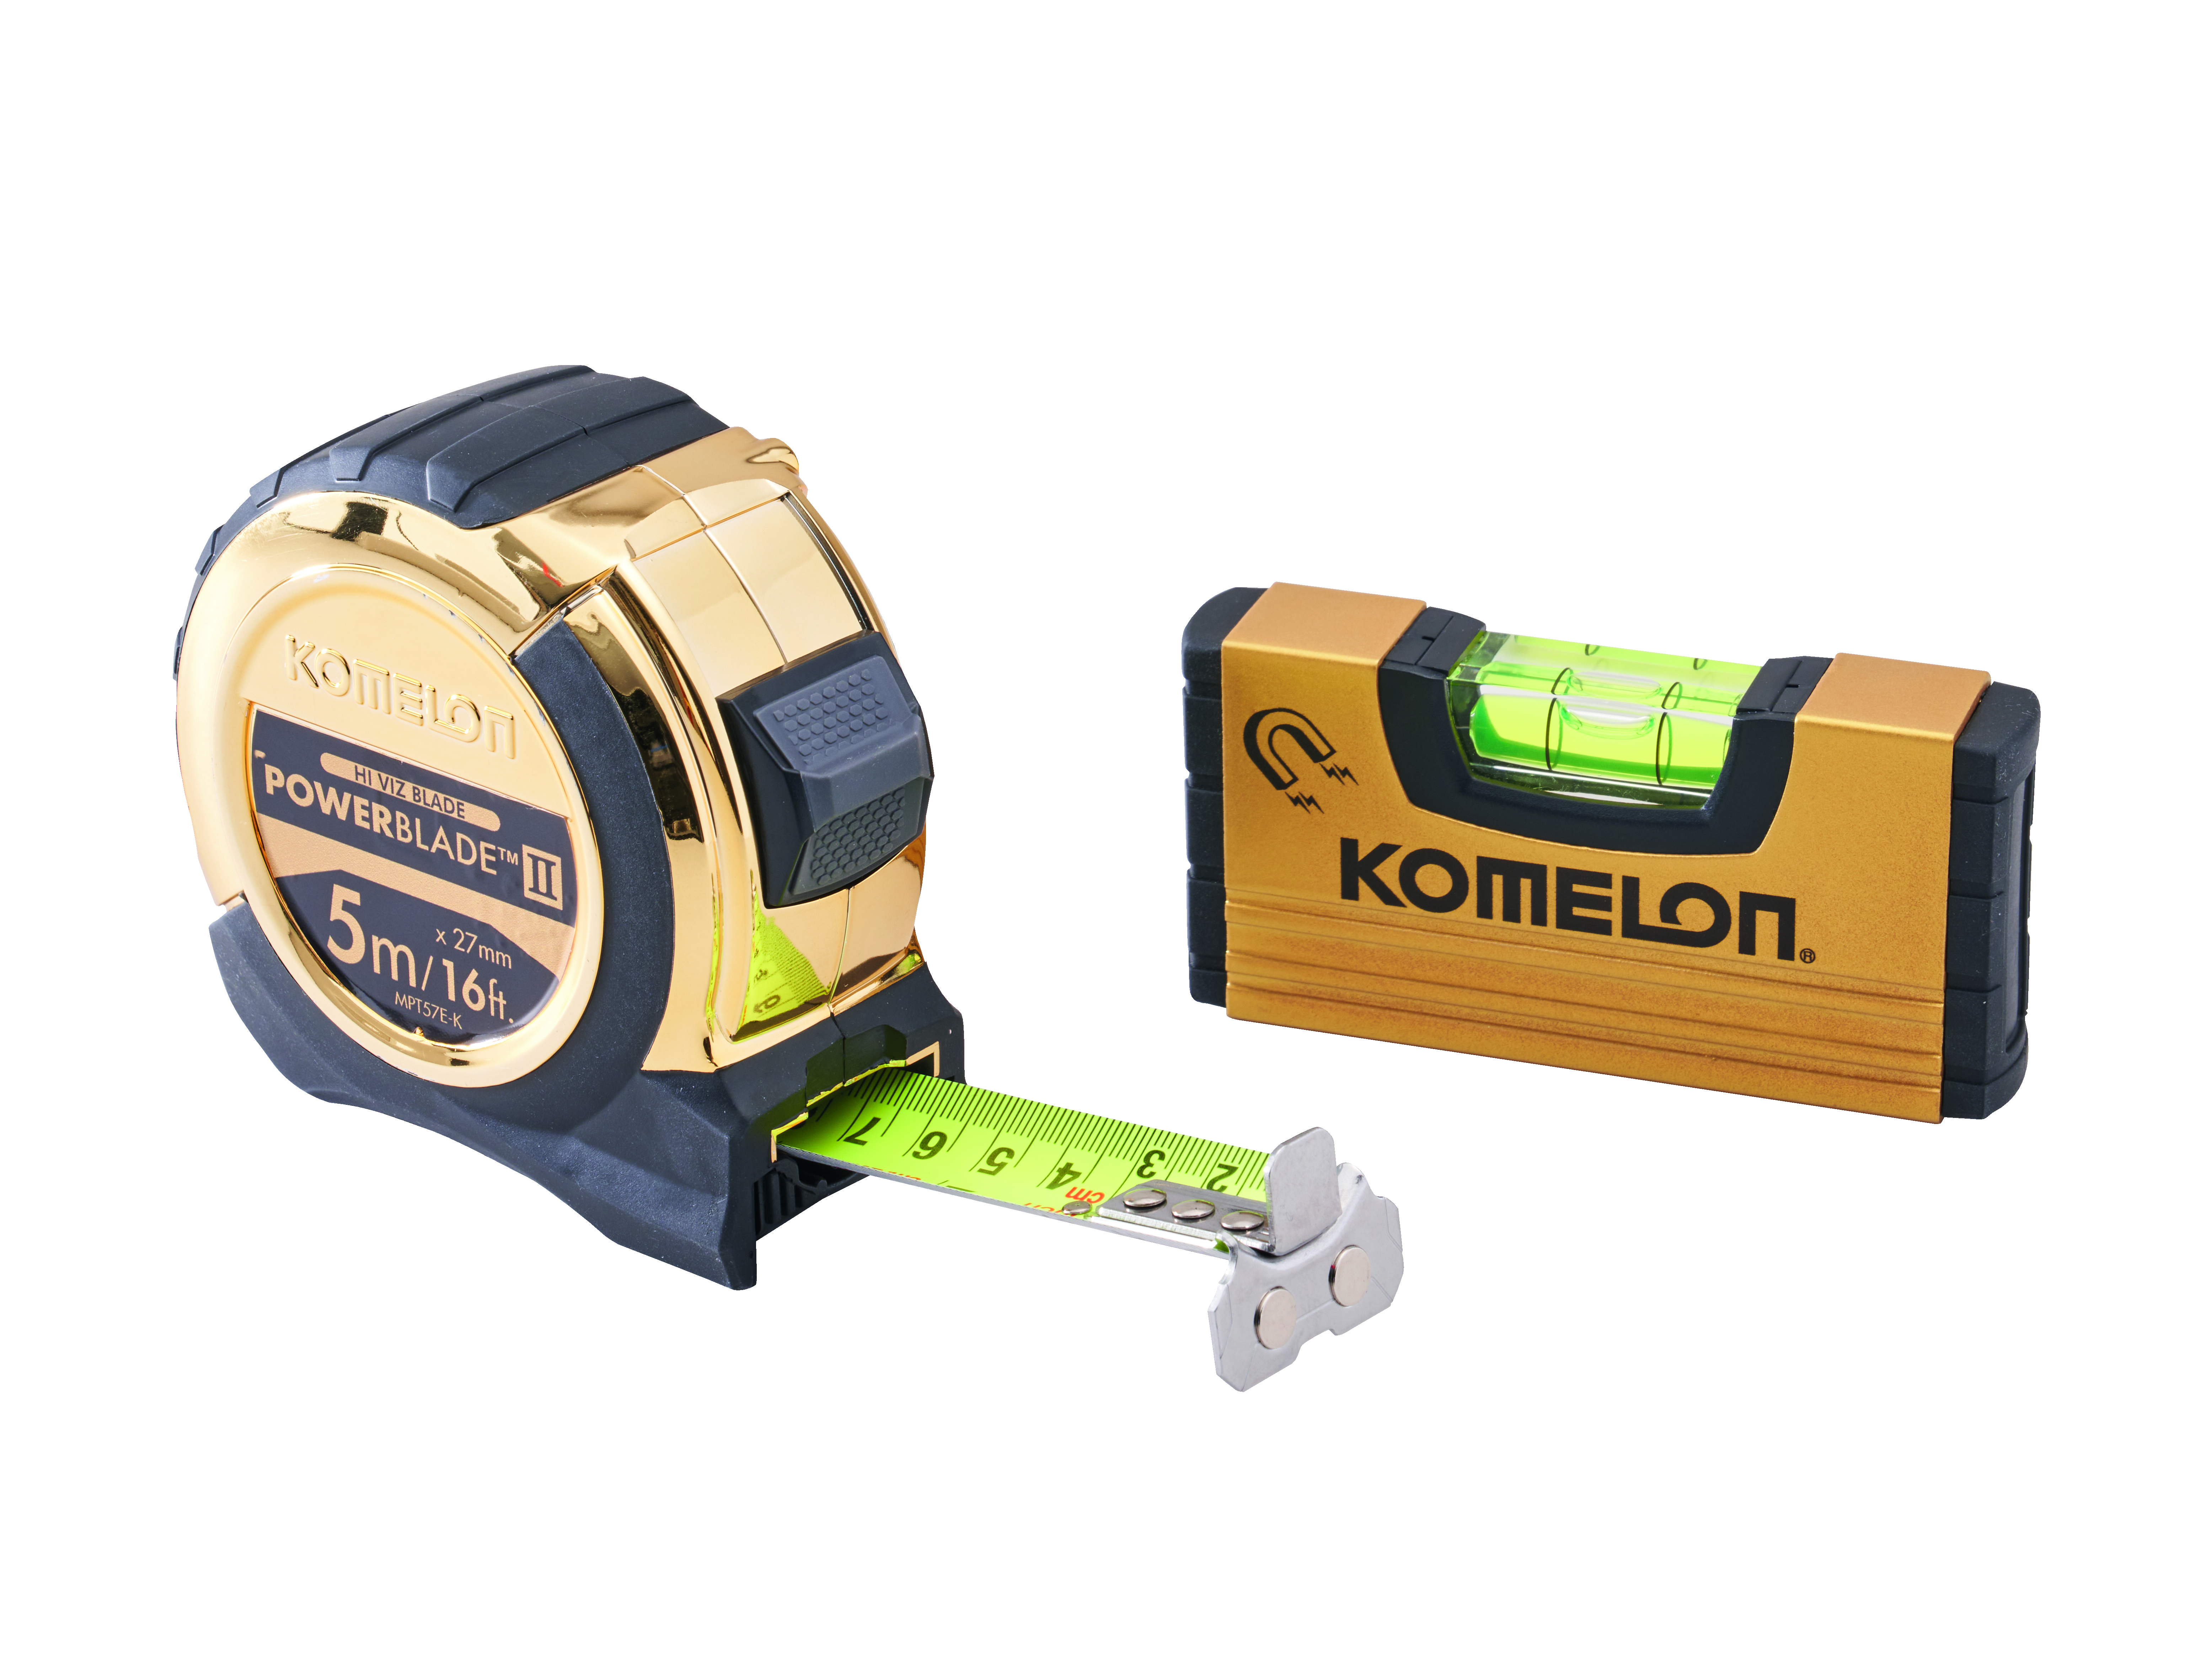 Komelon 5m (16ft) Gold PowerBlade II Tape with Gold Mini Level